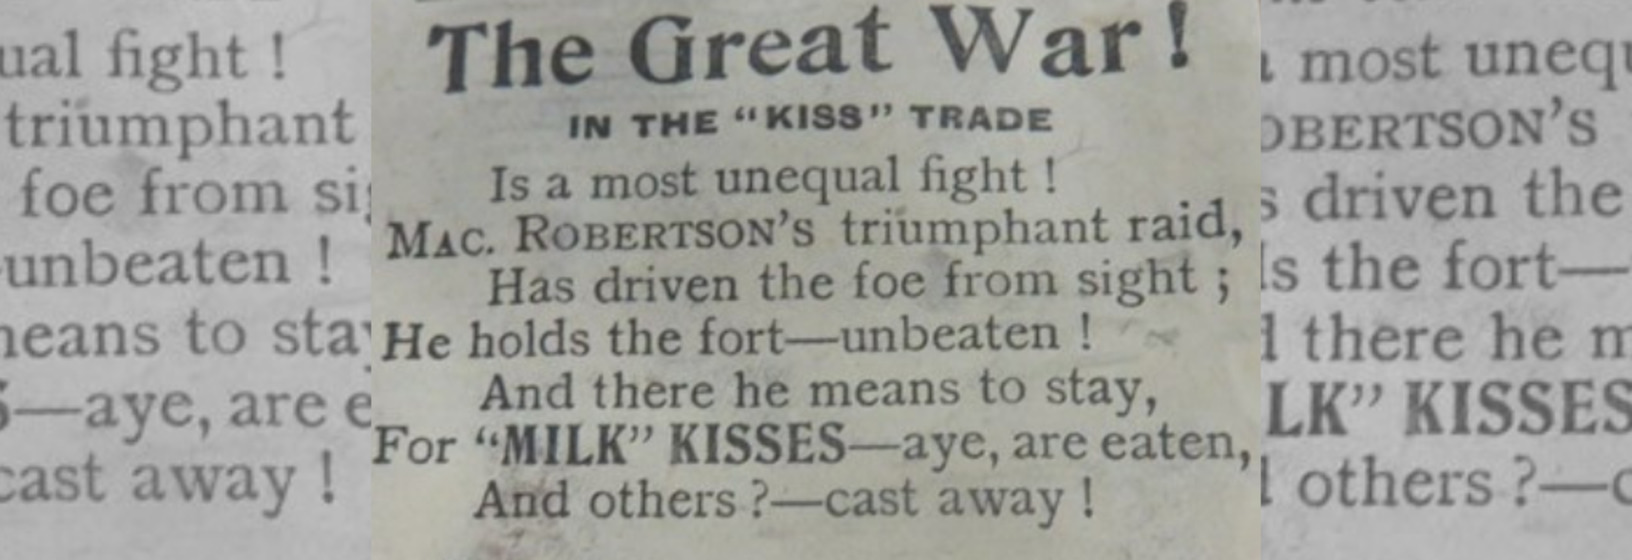 Collage advertisement for 'Milk Kisses'